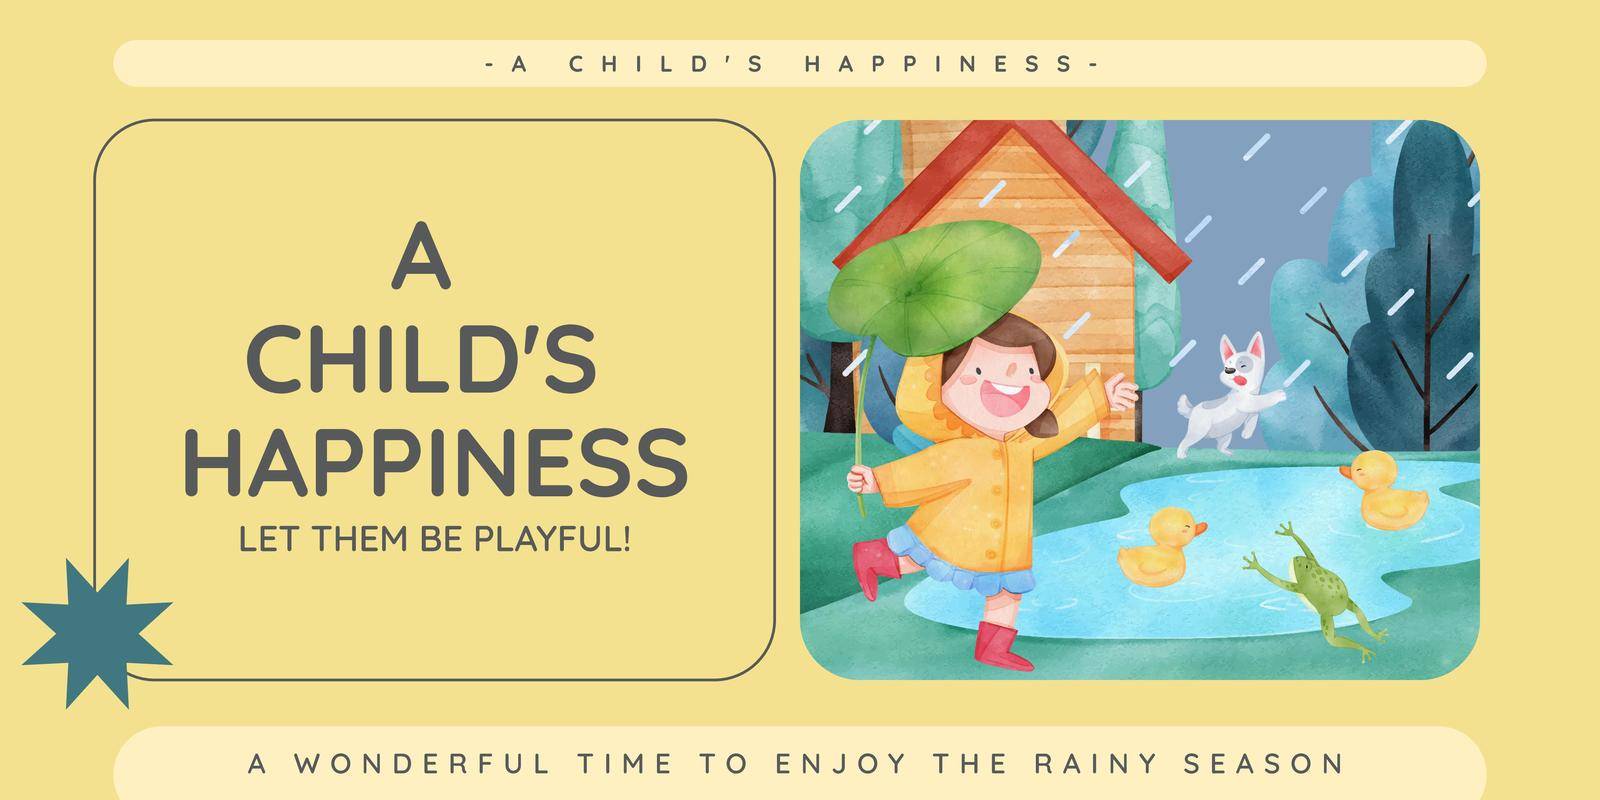 Blog header template with children rainy season concept,watercolor style by Photographeeasia